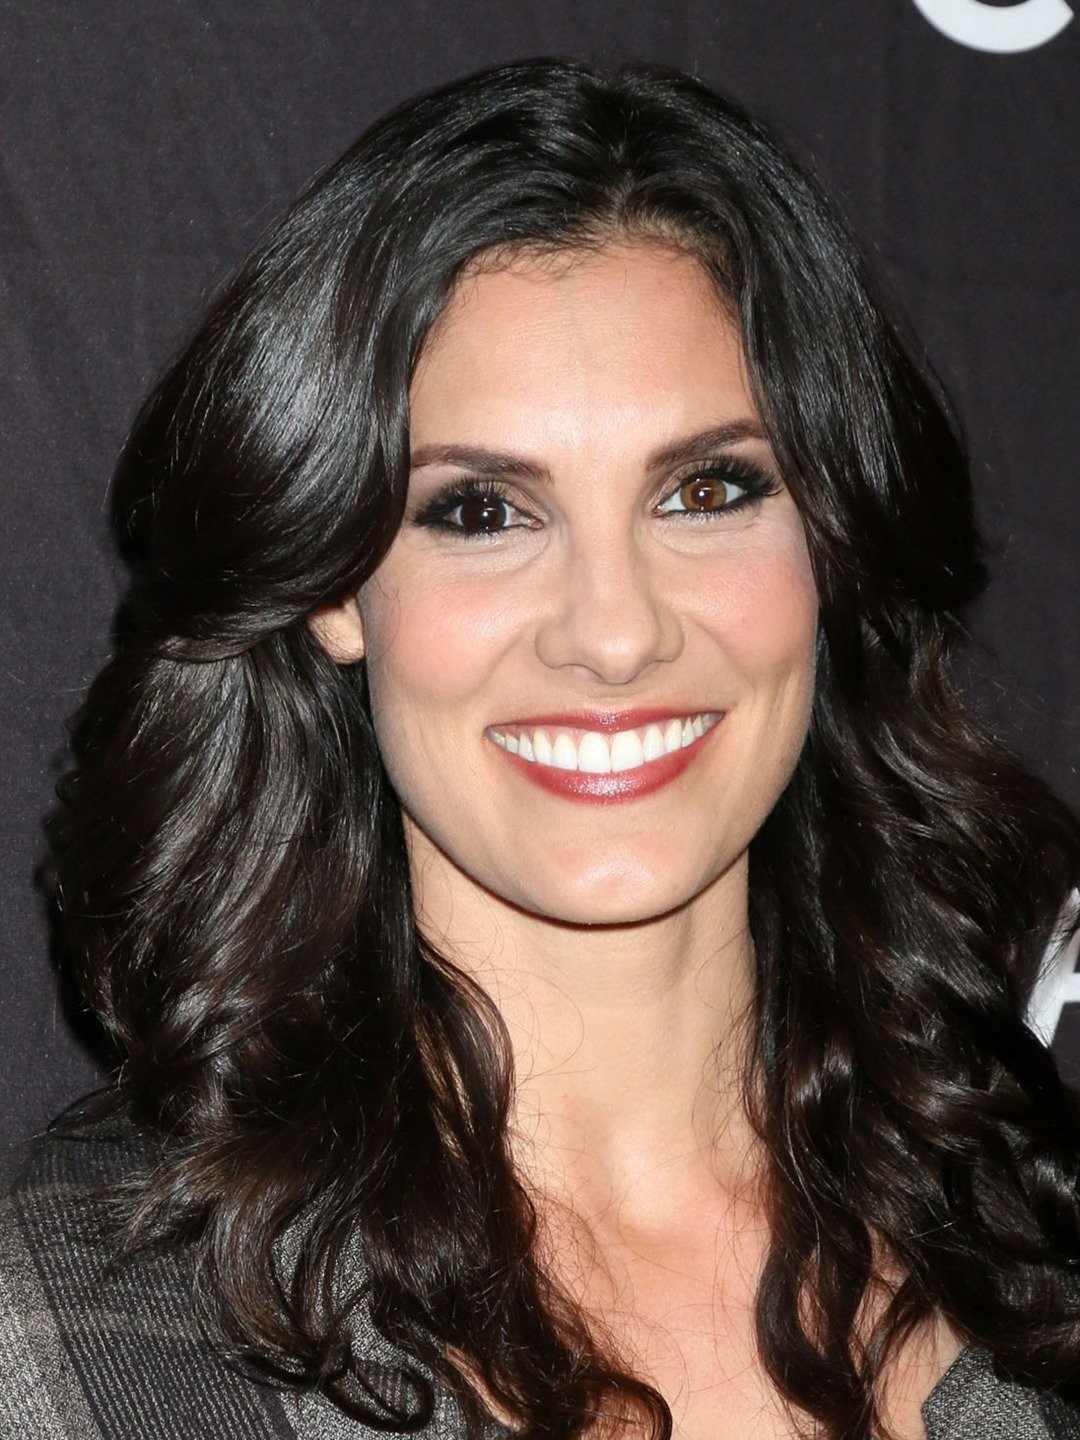 bobby gavin recommends Daniela Ruah Nudography